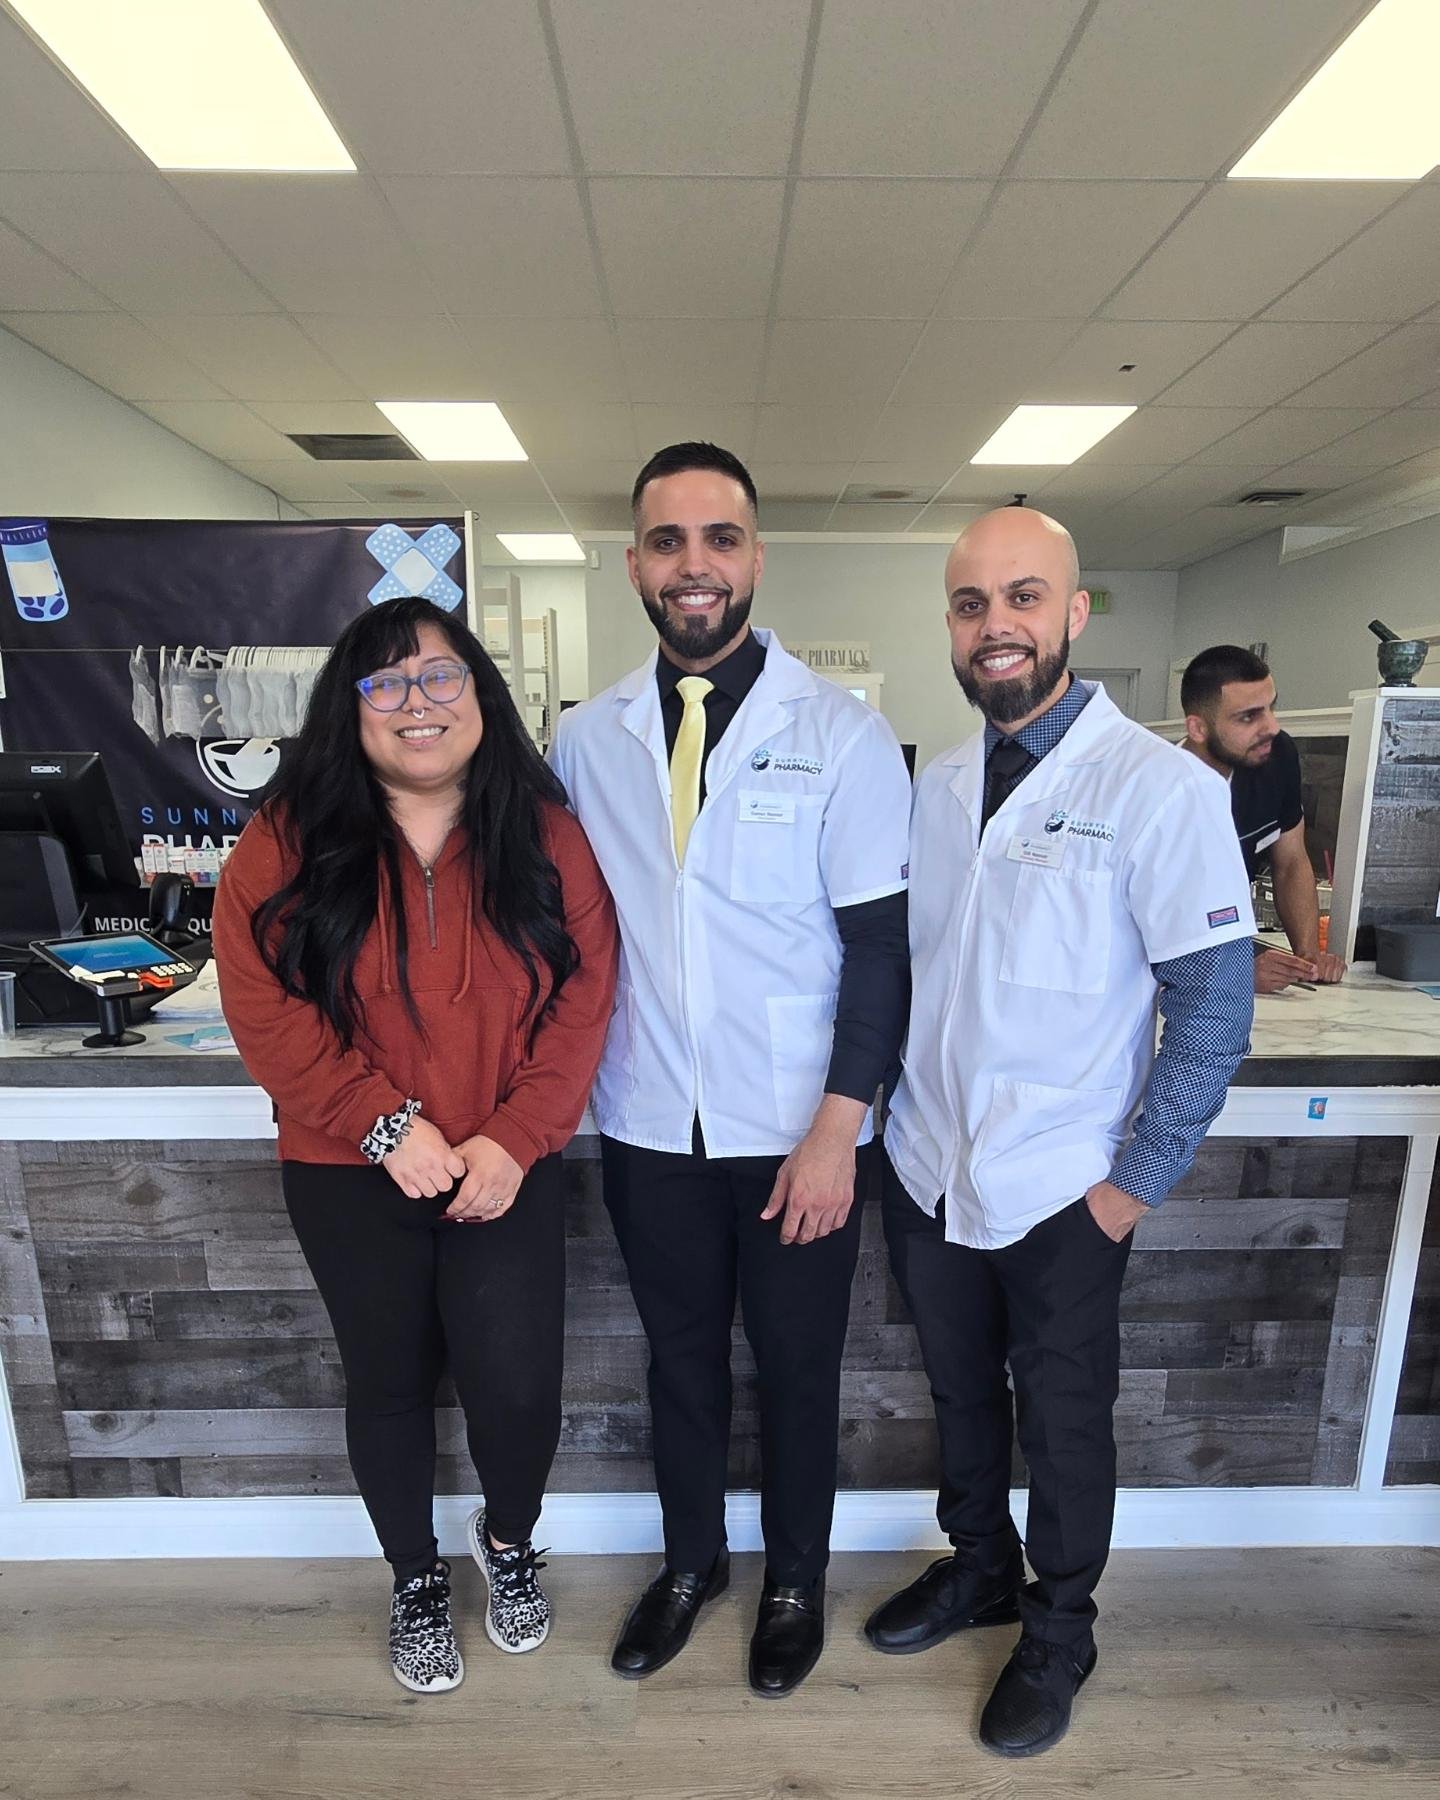 Felicidades to Samer and Udi Nassar on their grand opening! Such a blessing to have fellow Sunnysiders get their degrees, come back home, and open their own pharmacy to serve our comunidad! The Nassar family has been a huge part of our community with